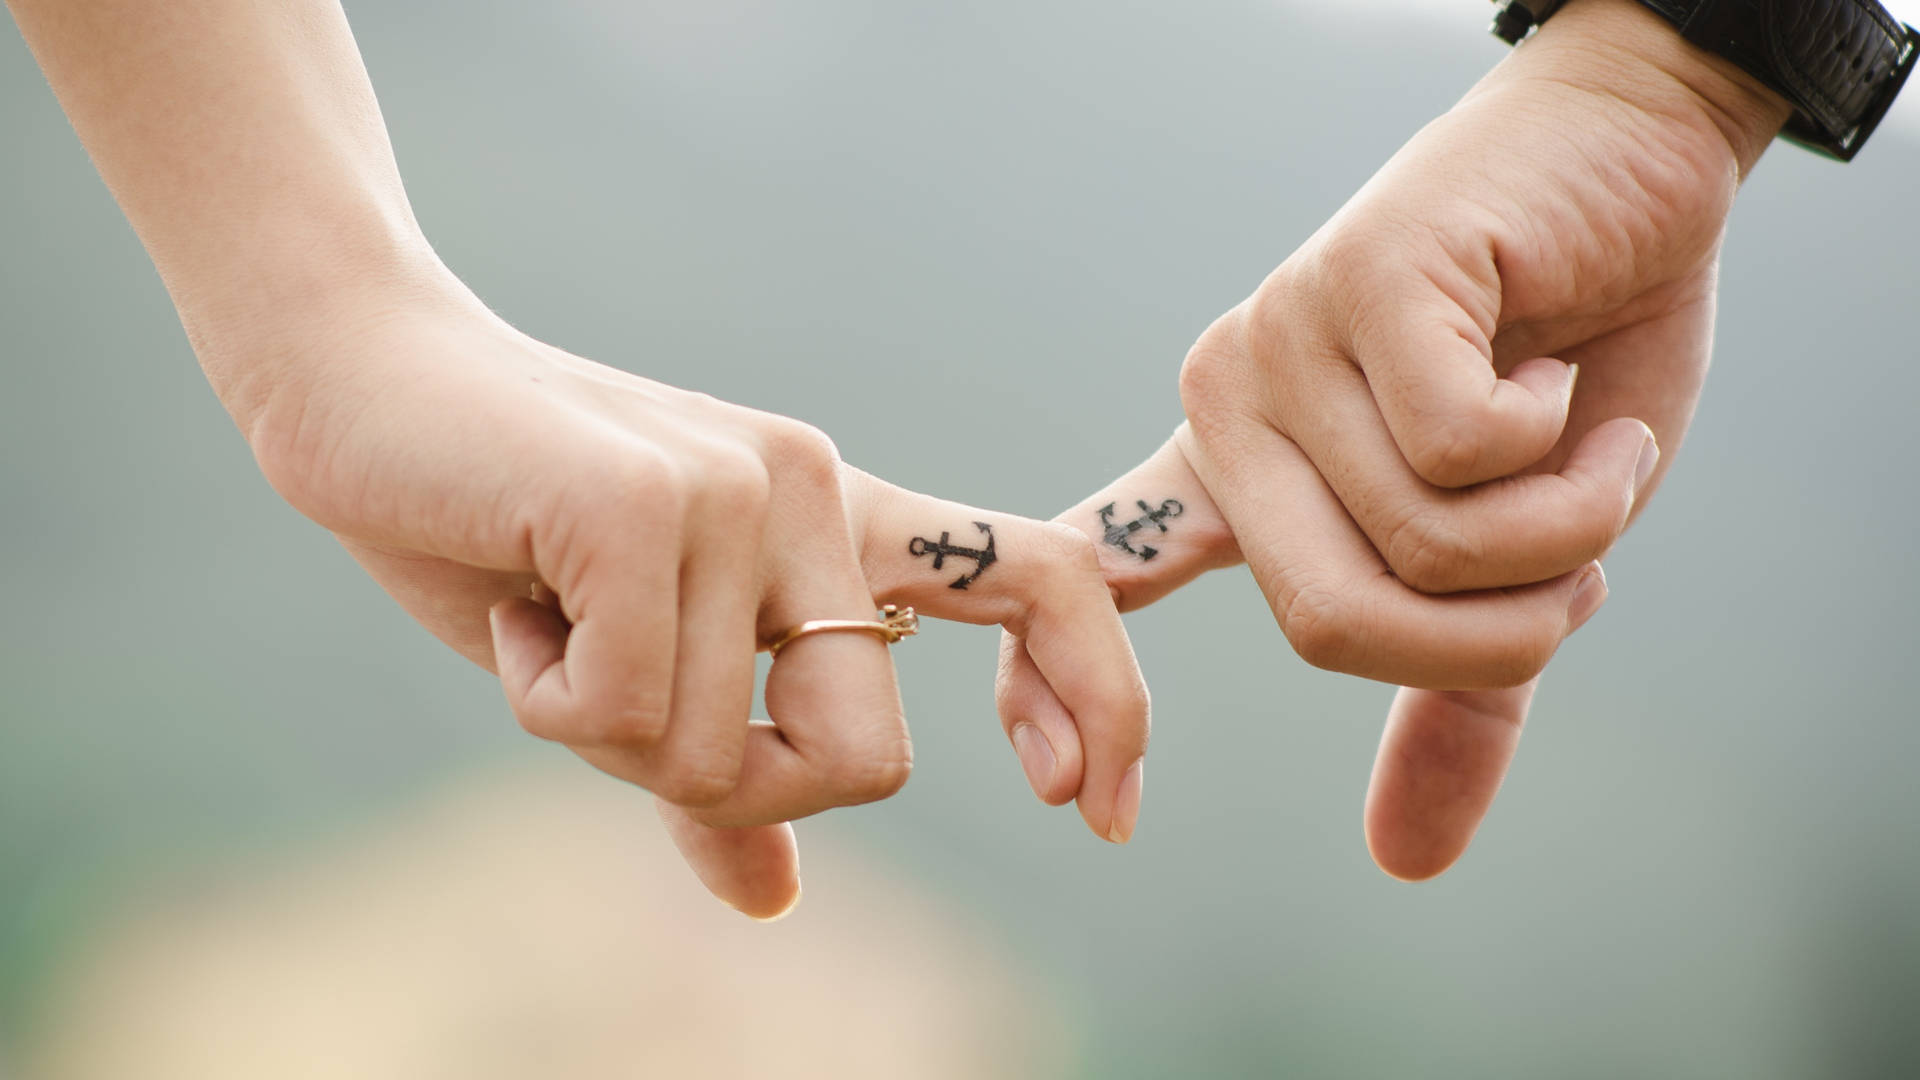 Sweet Holding Hands With Anchor Tattoos Wallpaper